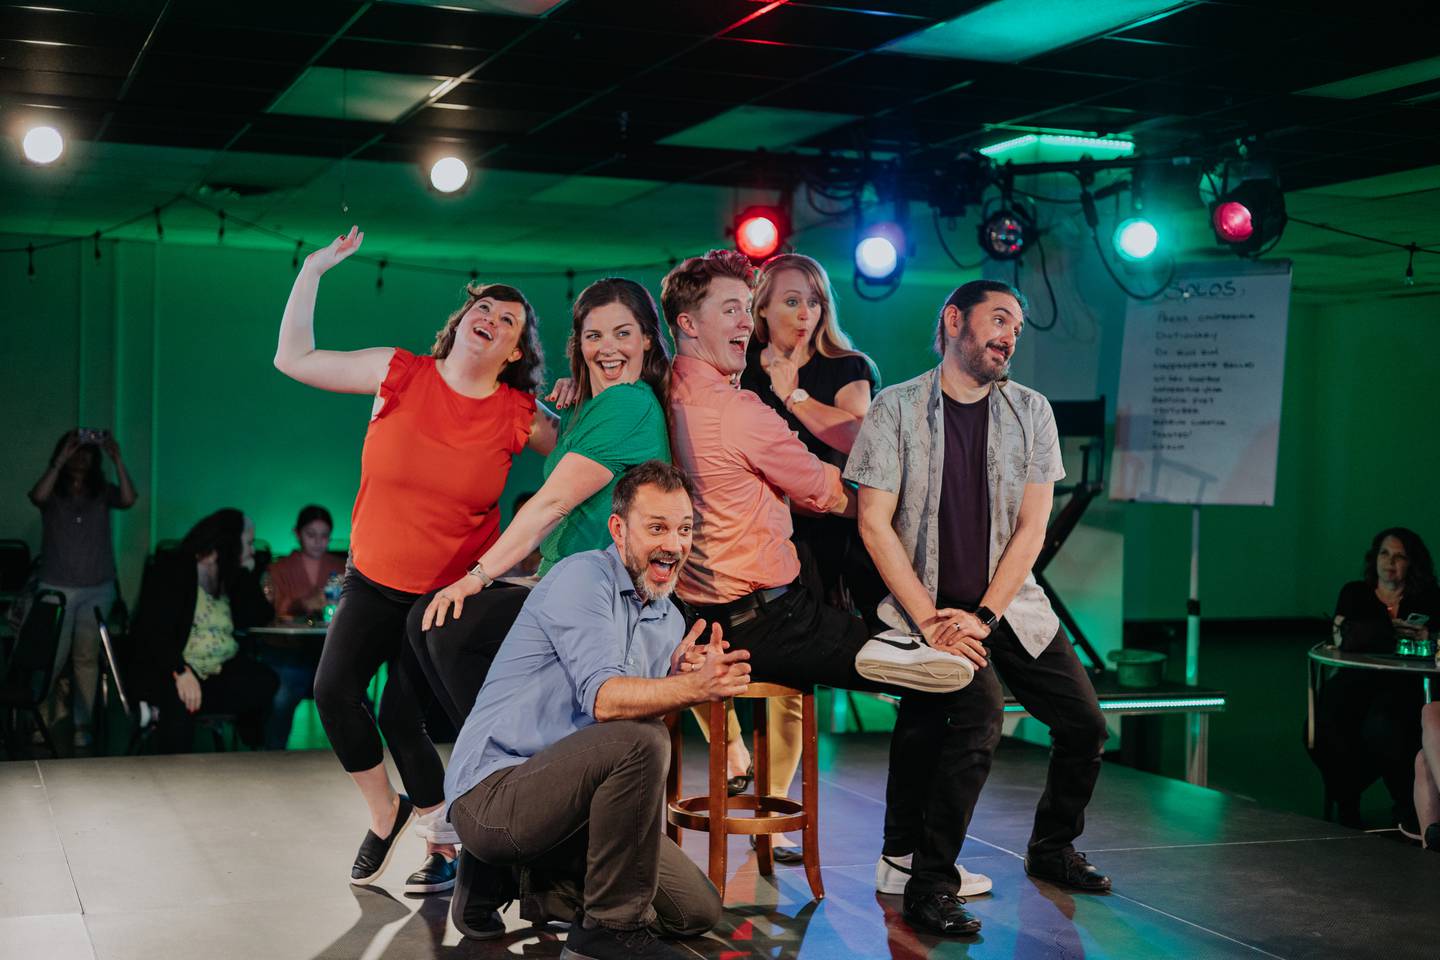 GreenRoom Improv performs regularly at The Hemmens Cultural Center in Elgin (shown) and Raue Center For The Arts in Crystal Lake.